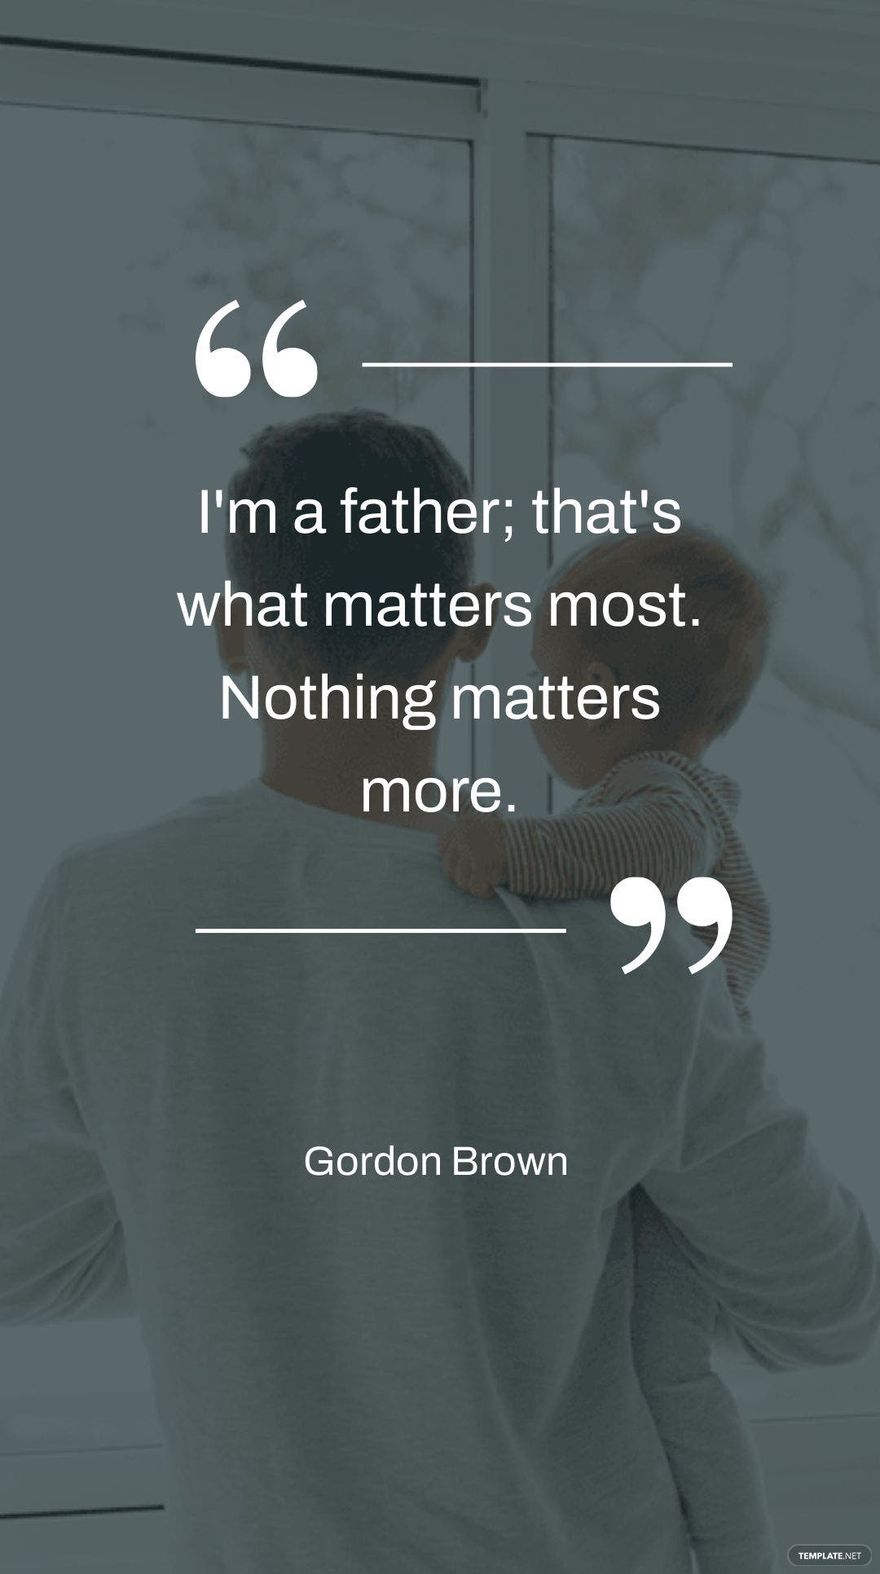 Gordon Brown - I'm a father; that's what matters most. Nothing matters more.